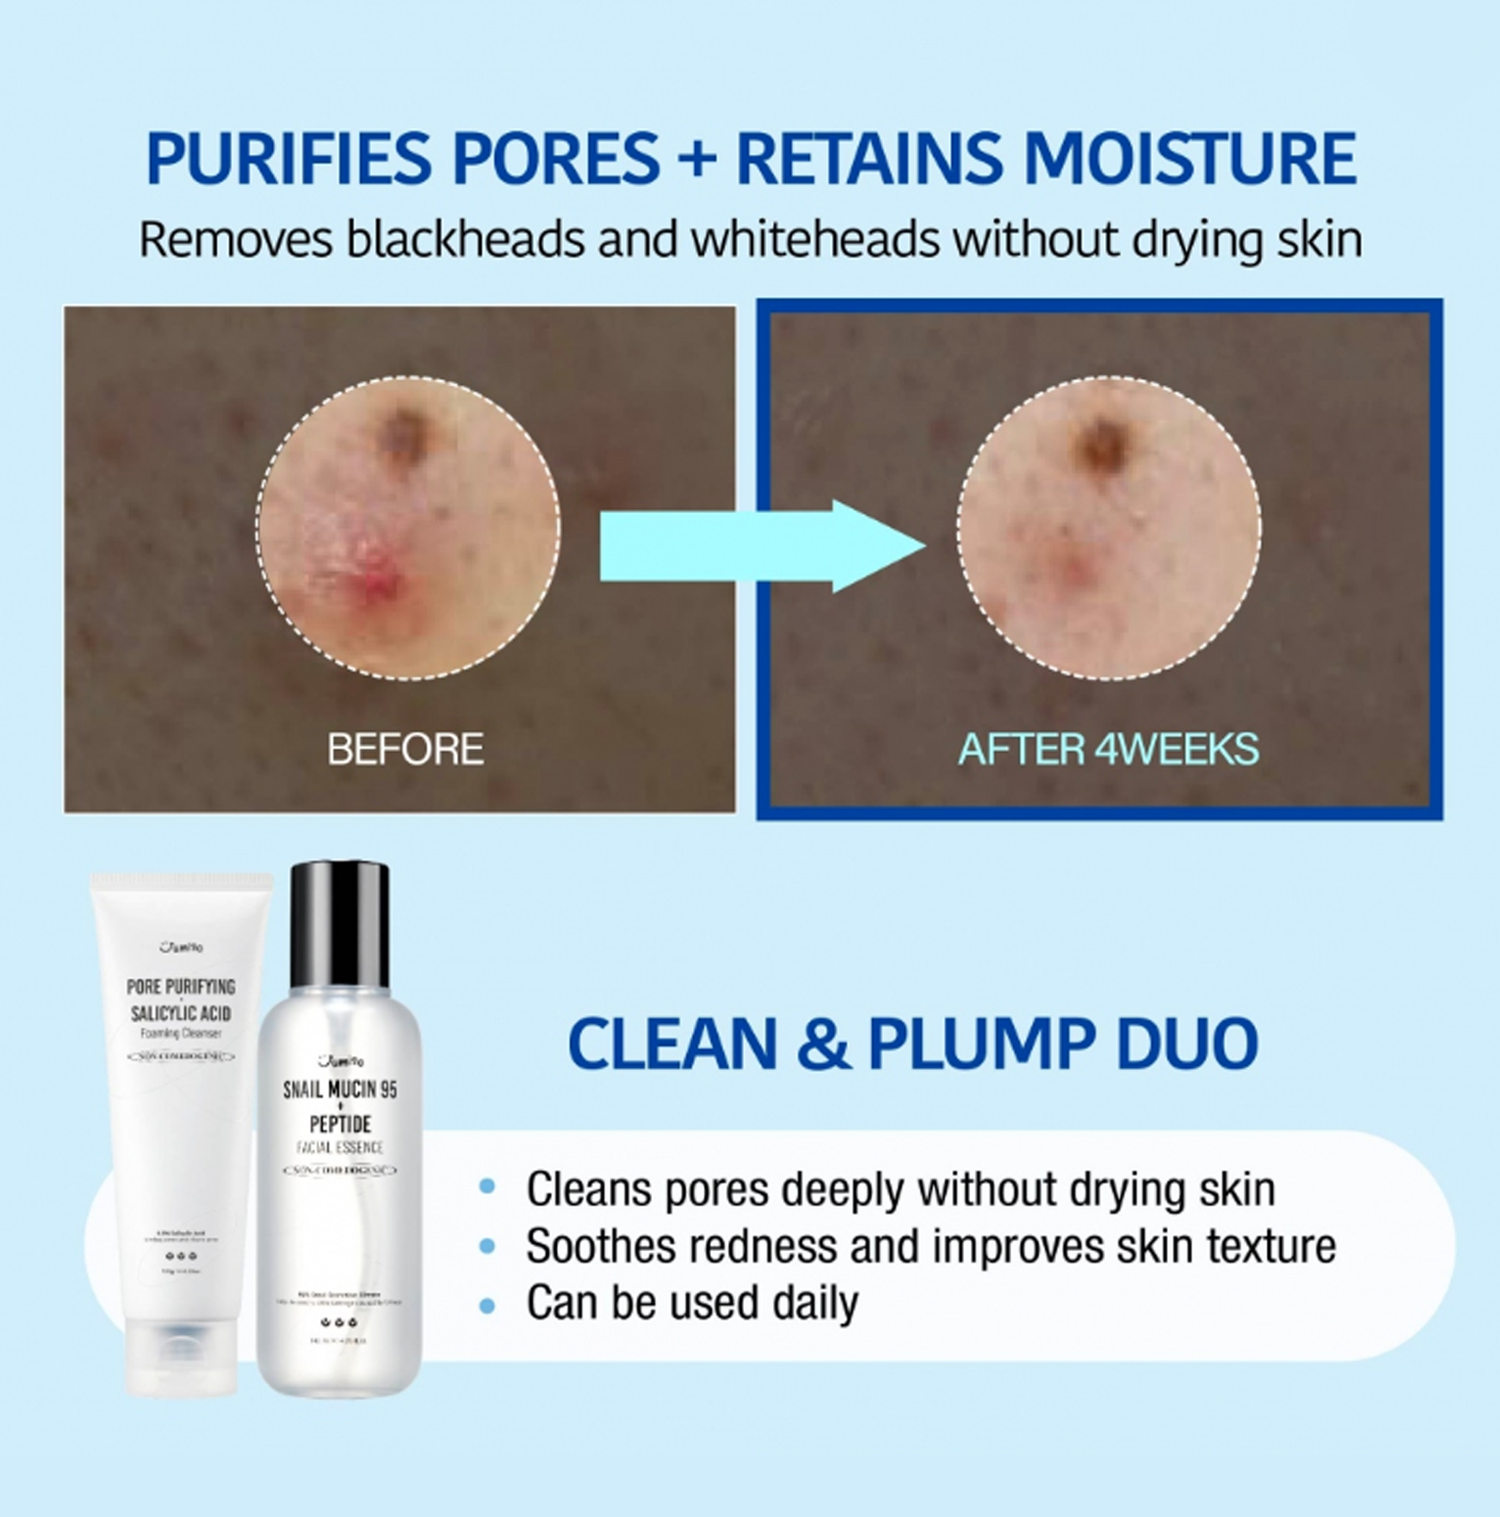 [NEW] Pore-Purifying Salicylic Acid Foaming Cleanser 120g